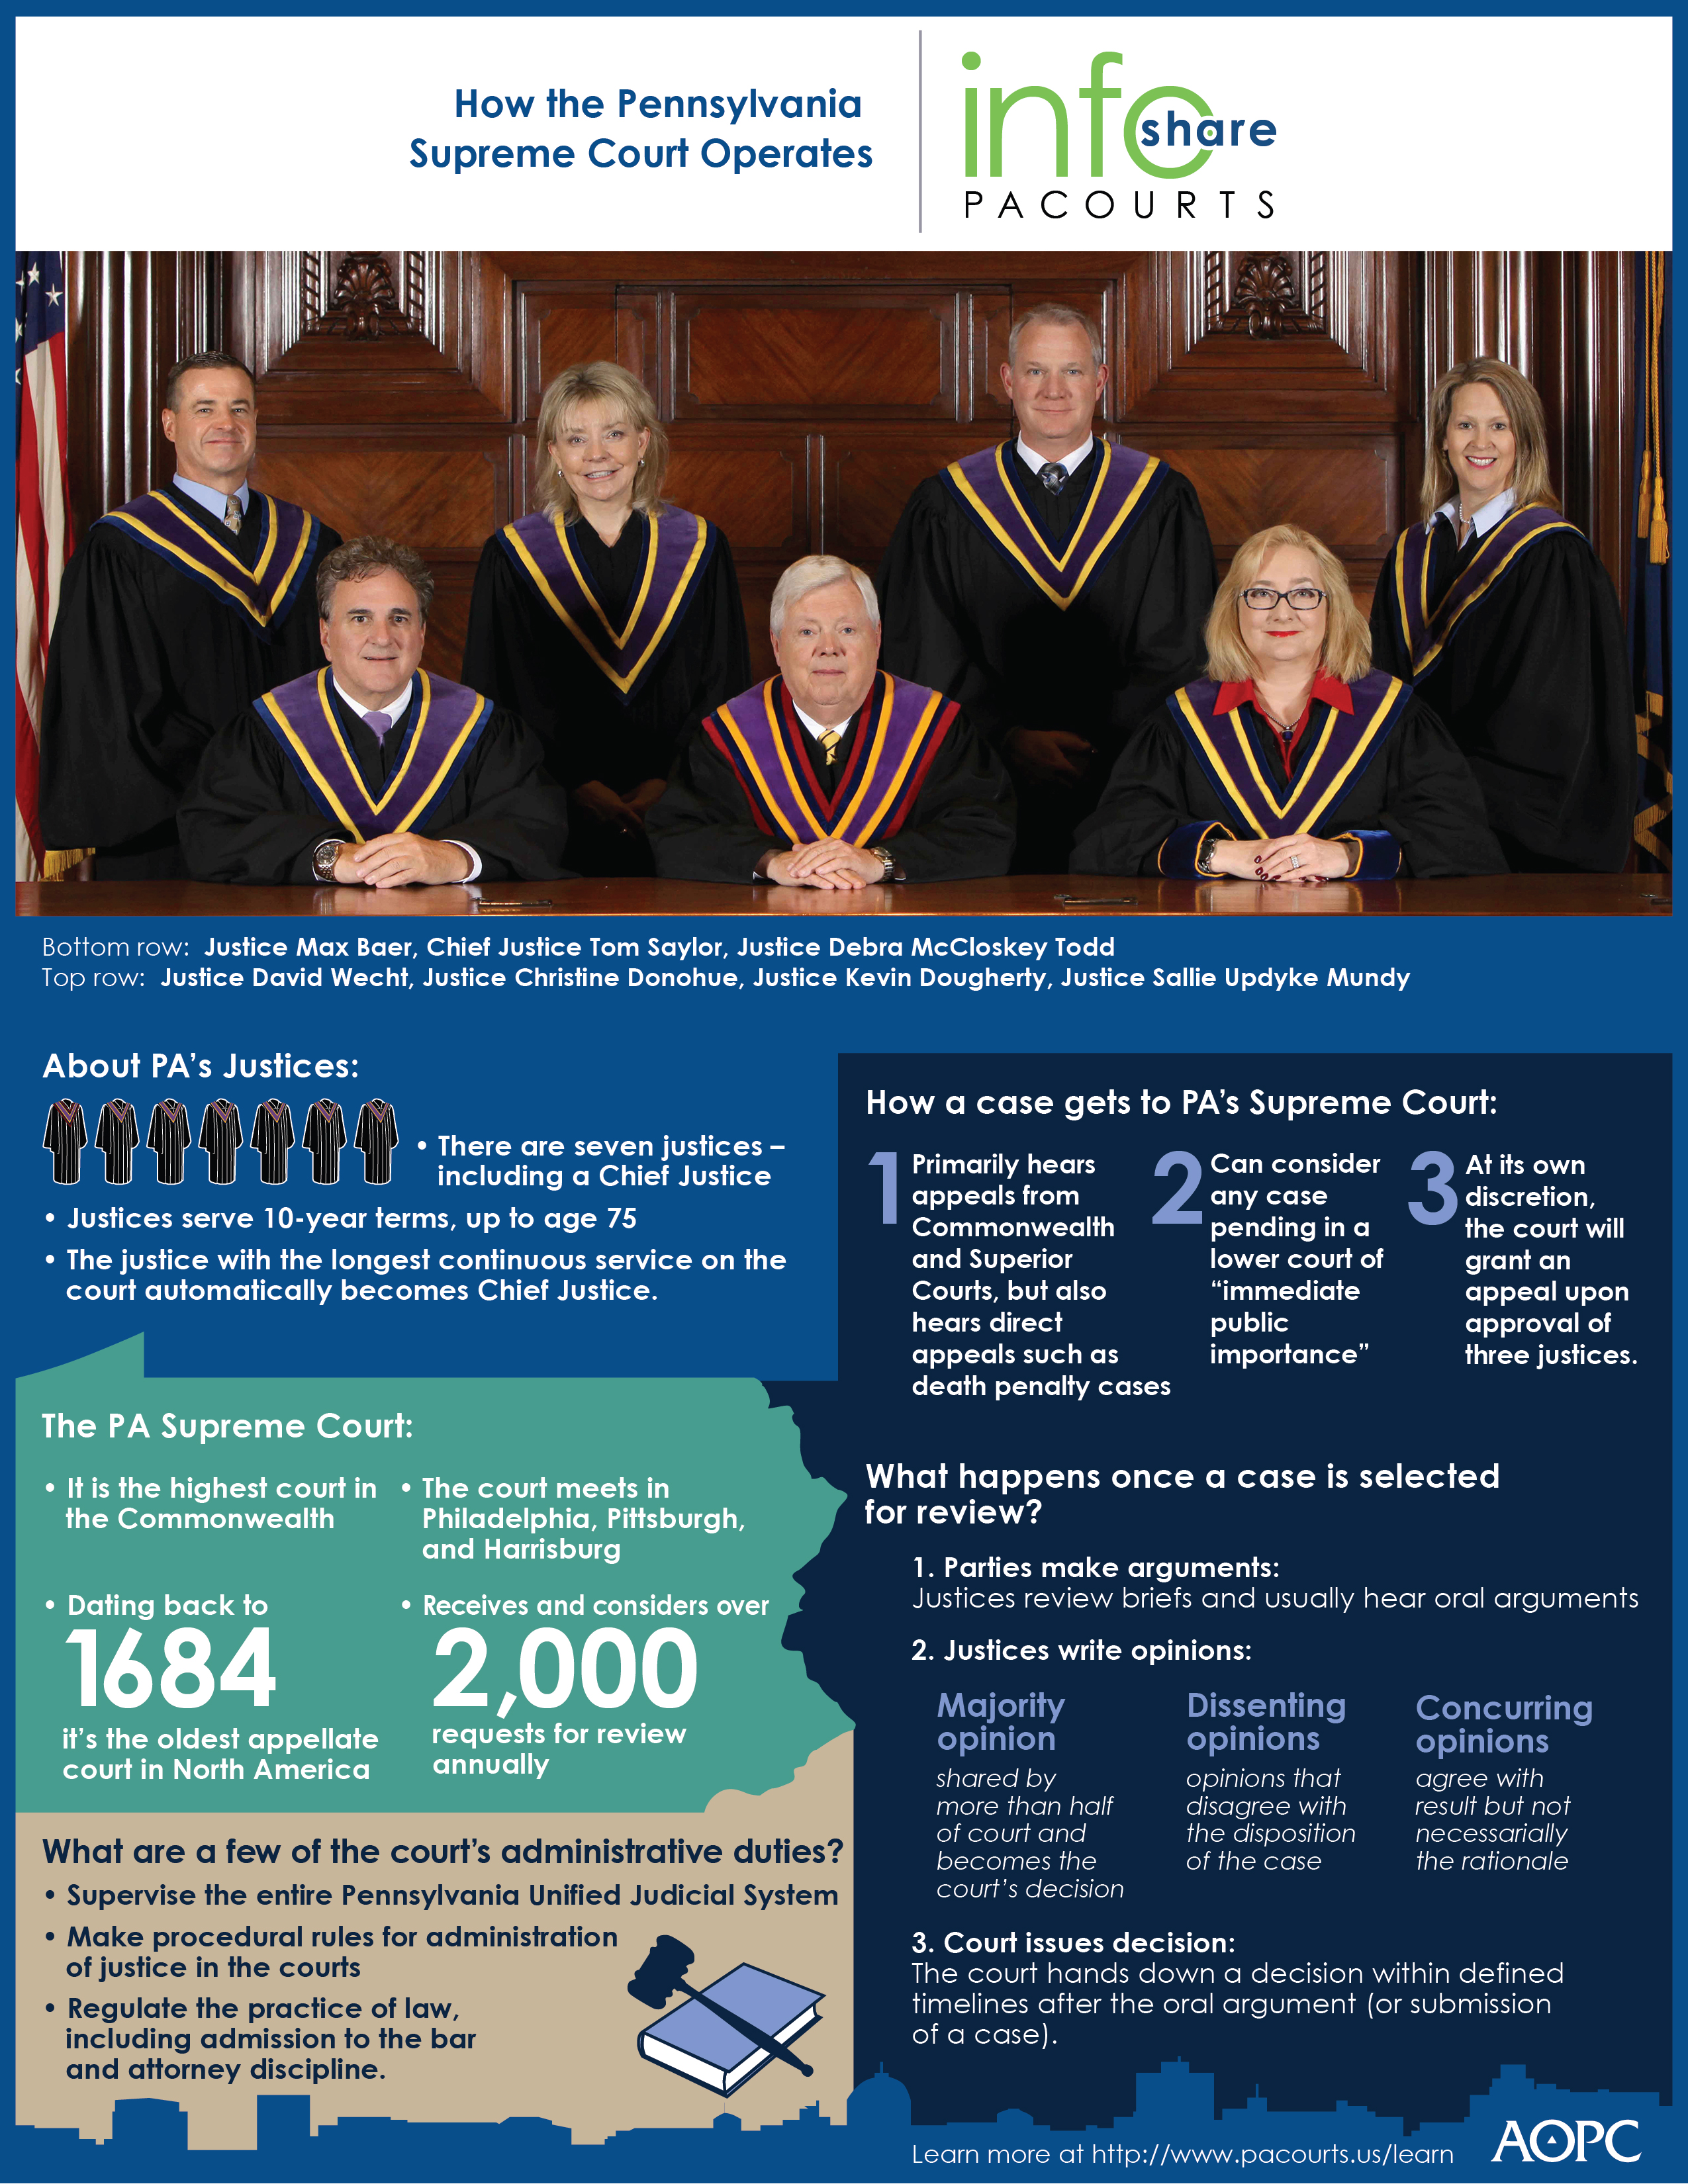 How the Pennsylvania Supreme Court Operates - infographic